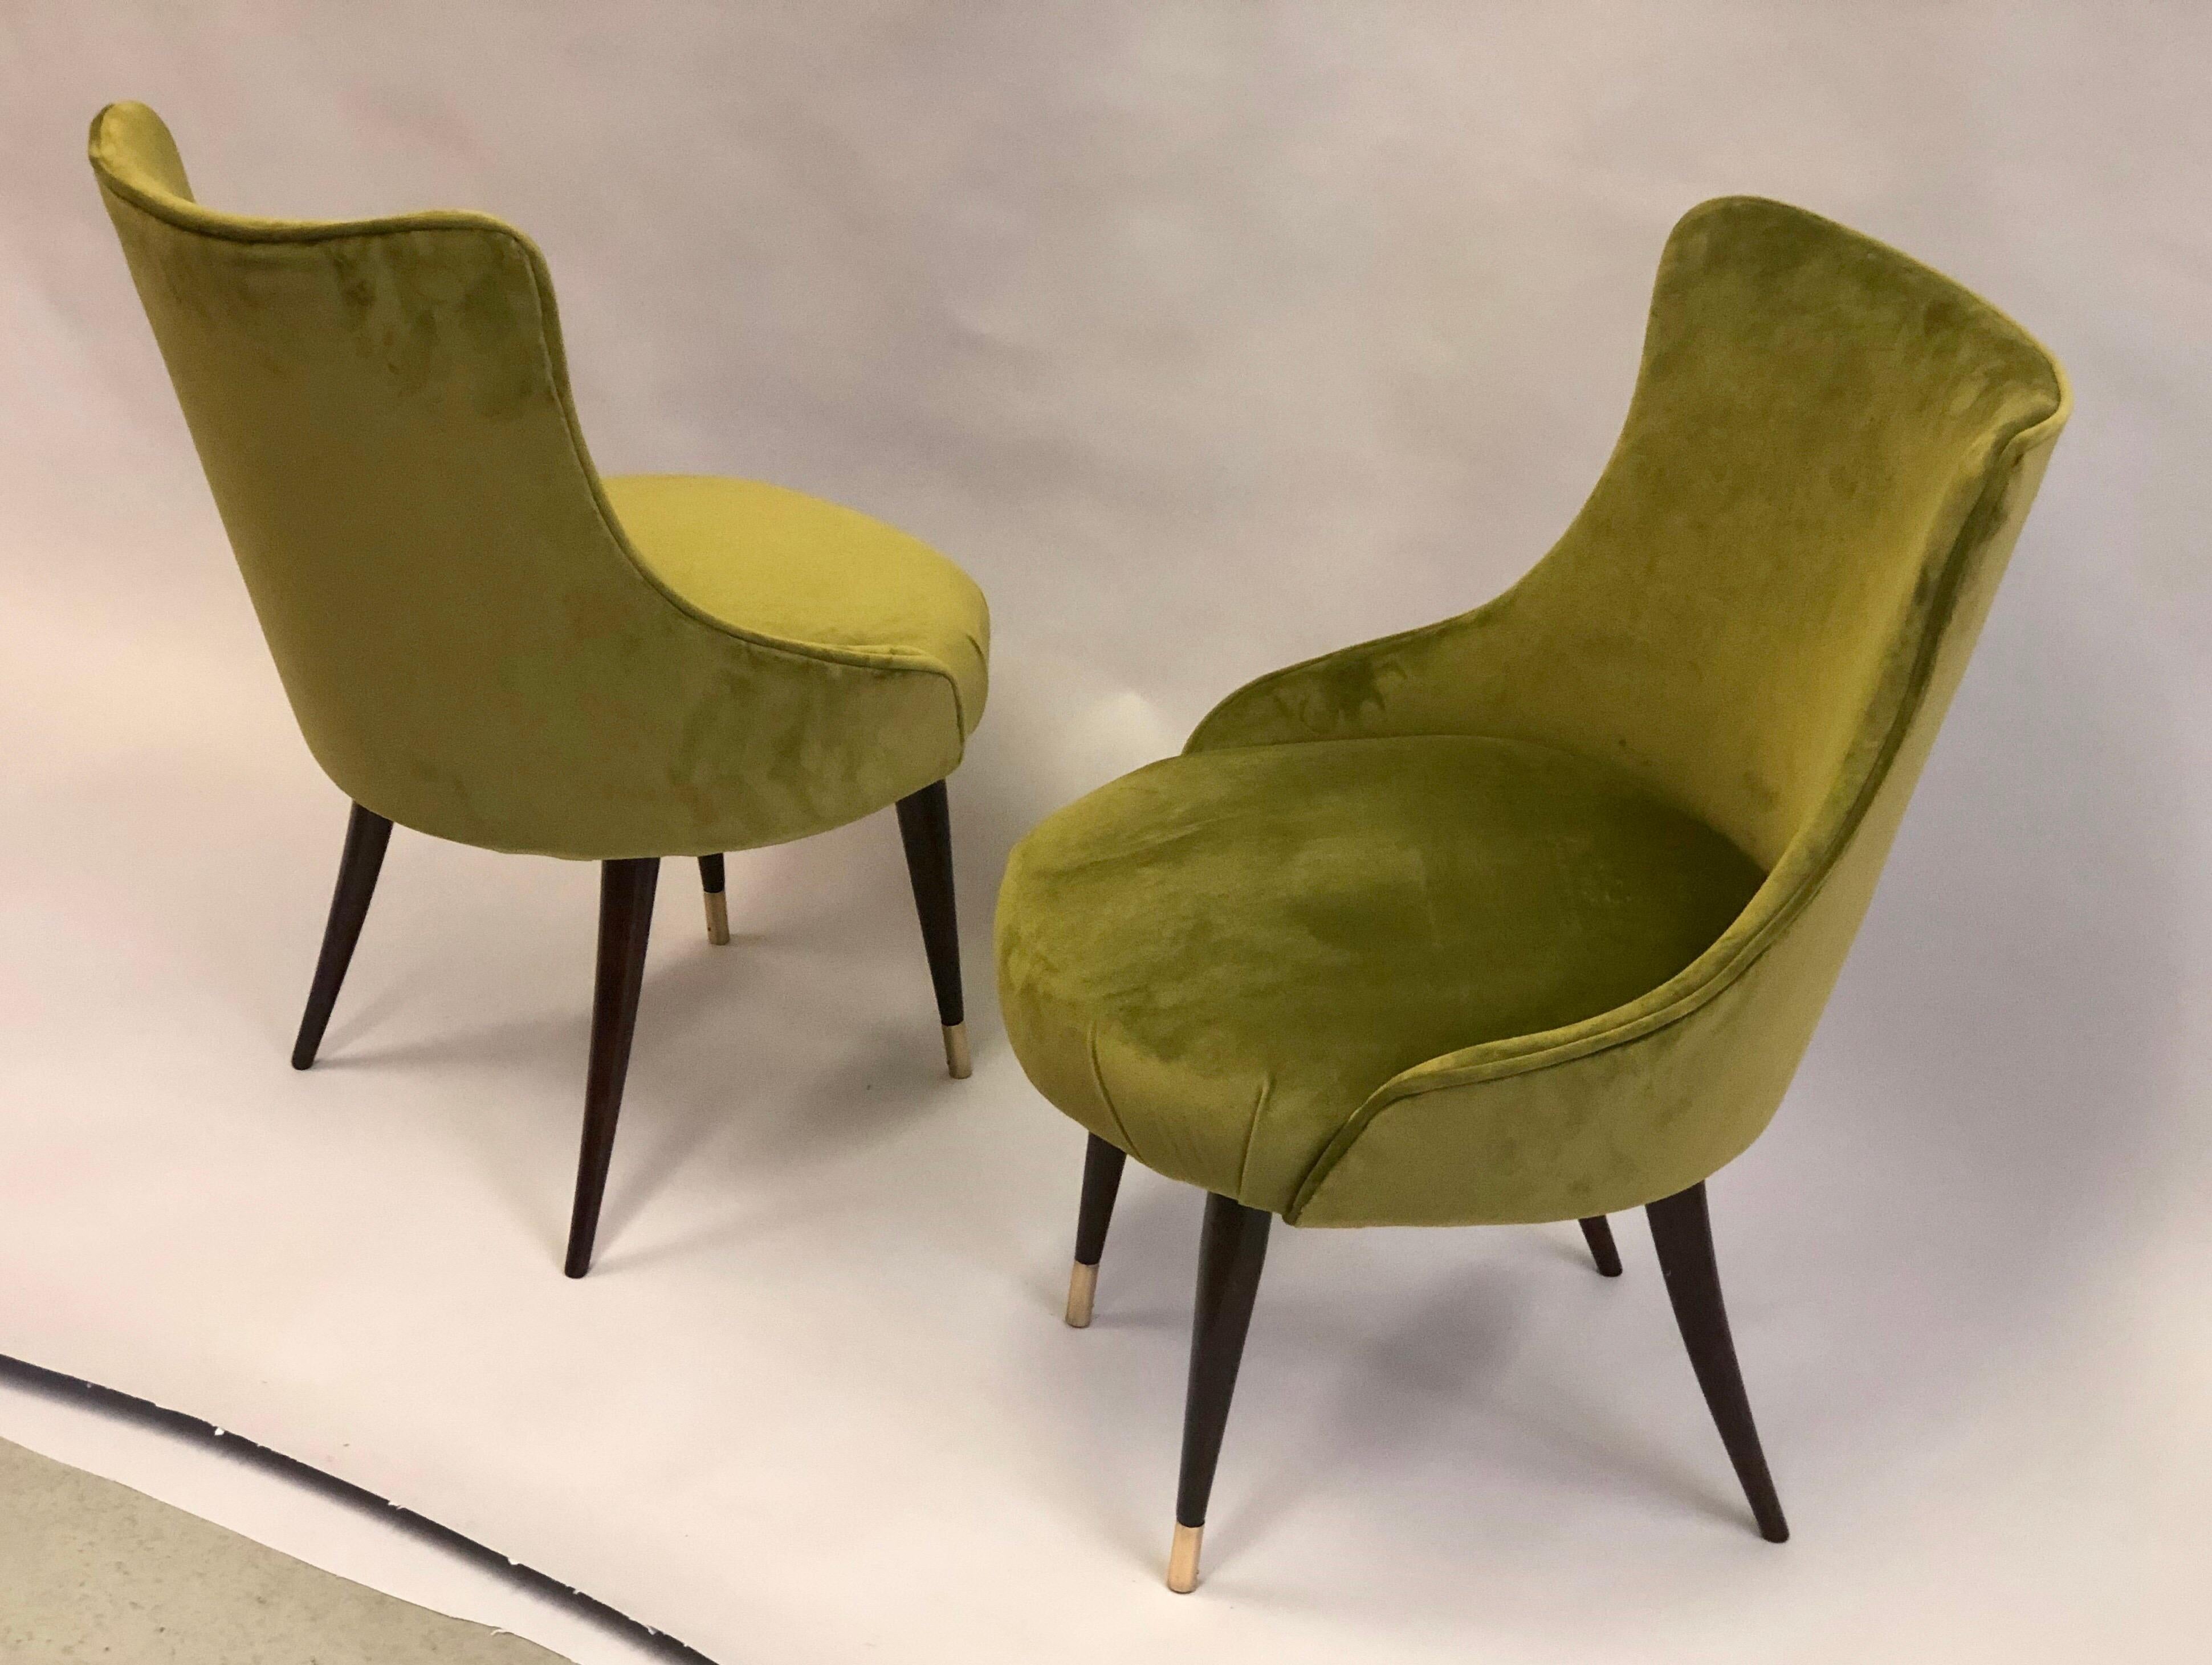 Pair of Italian Mid-Century Modern Lounge / Slipper Chairs by Guglielmo Ulrich For Sale 3